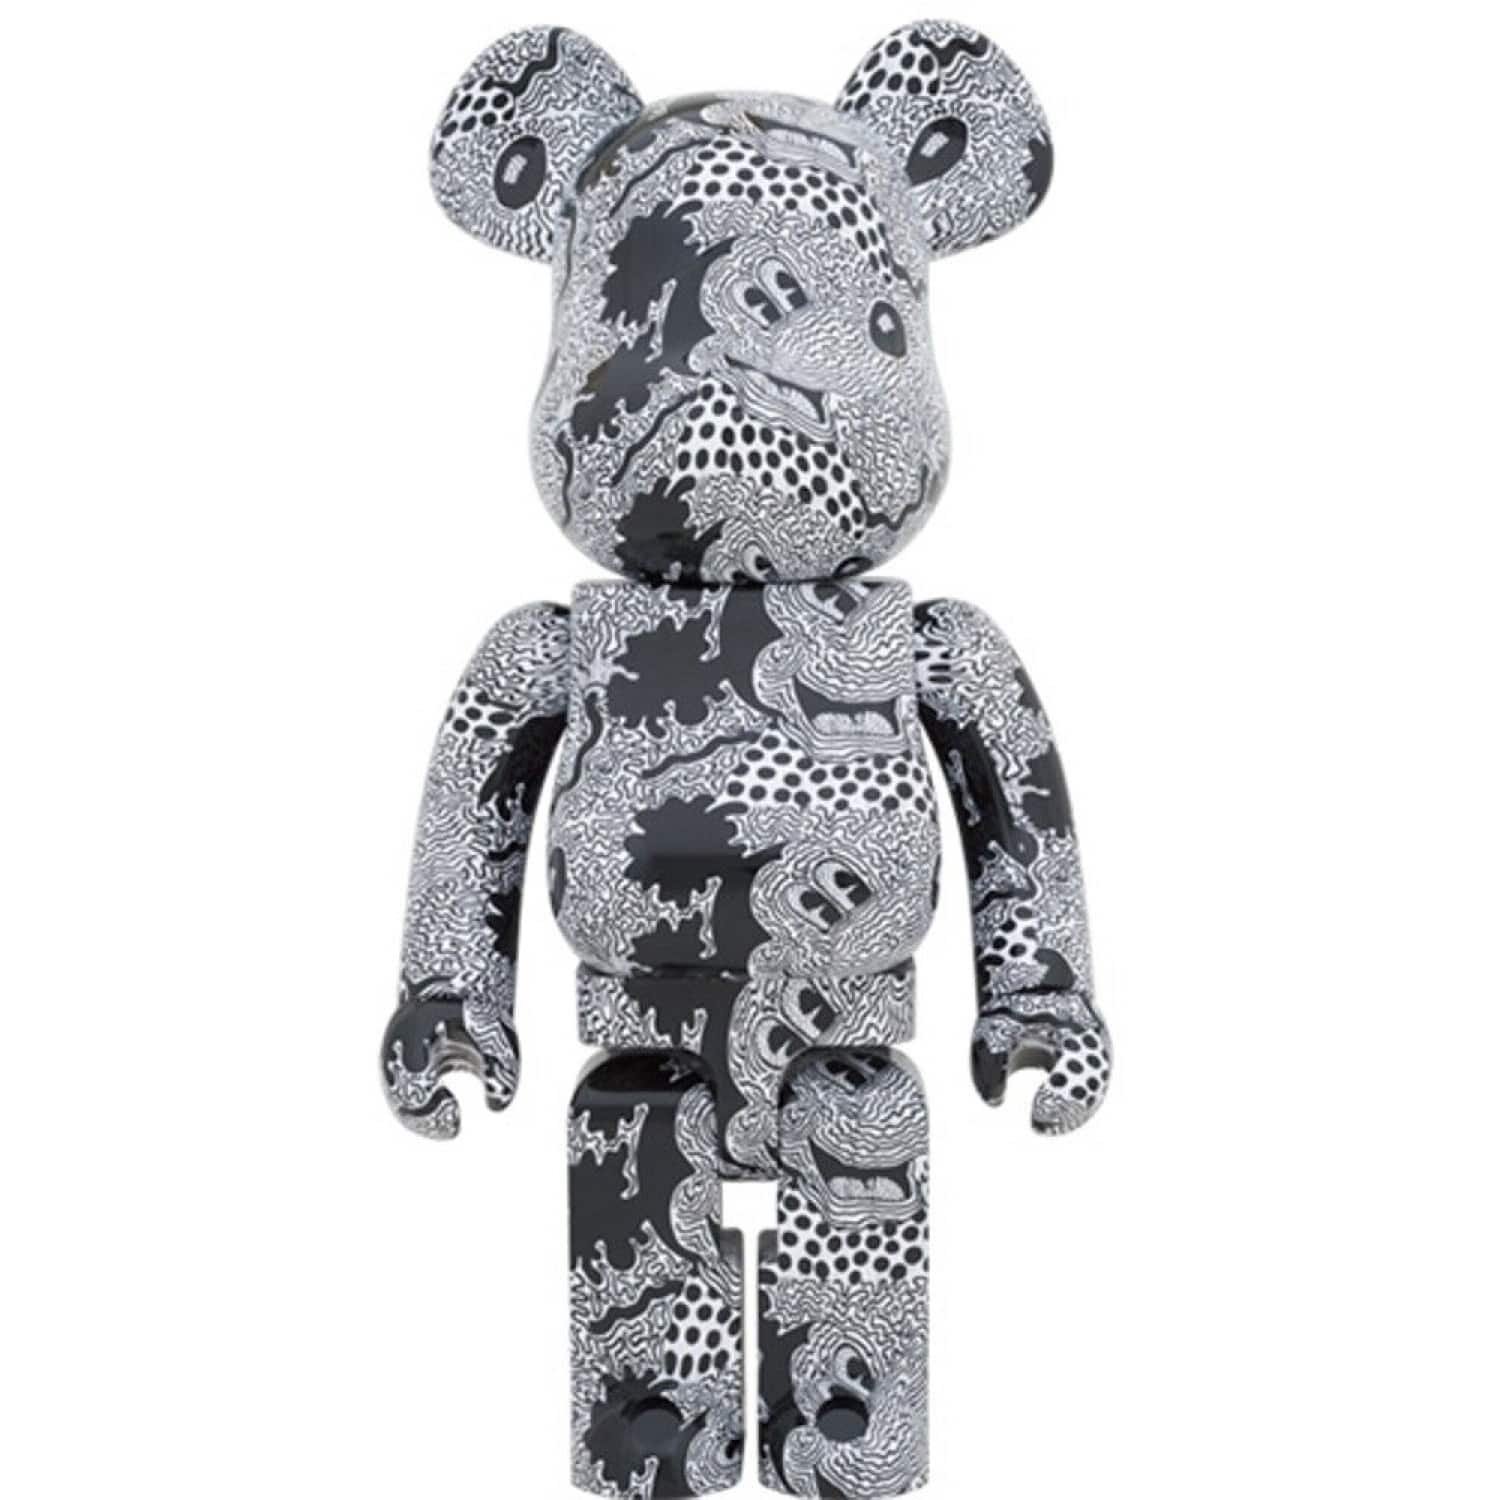 “Keith Haring Mickey Mouse” from Be@rbrick - Dope! Gallery